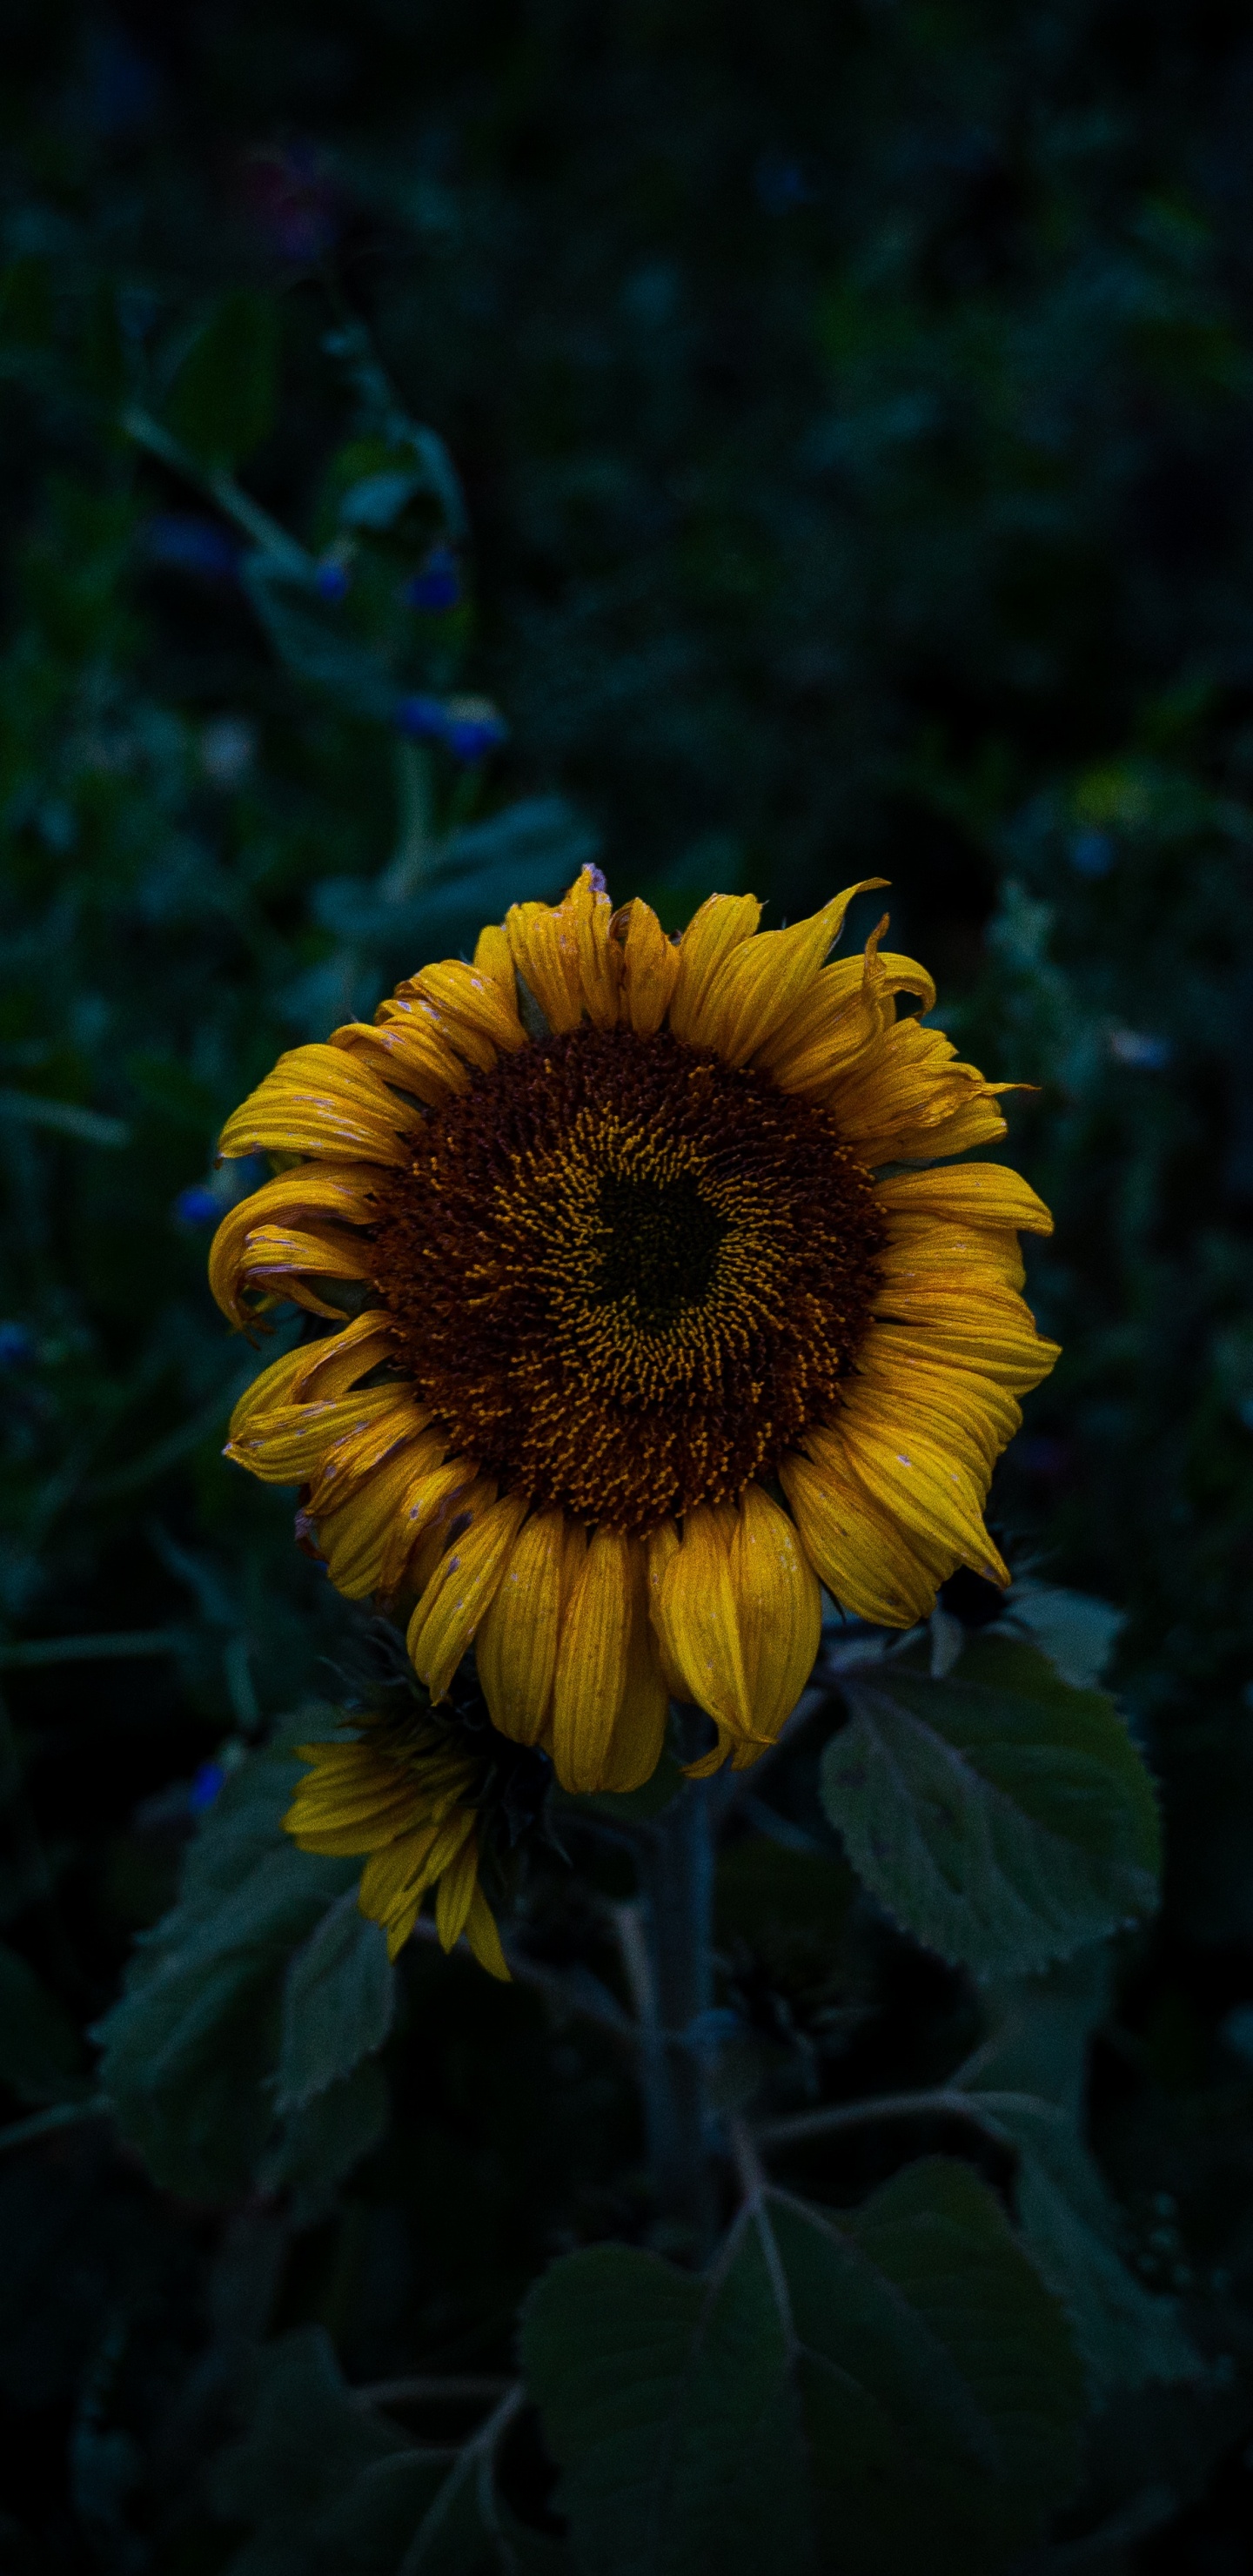 Yellow Sunflower in Bloom During Daytime. Wallpaper in 1440x2960 Resolution